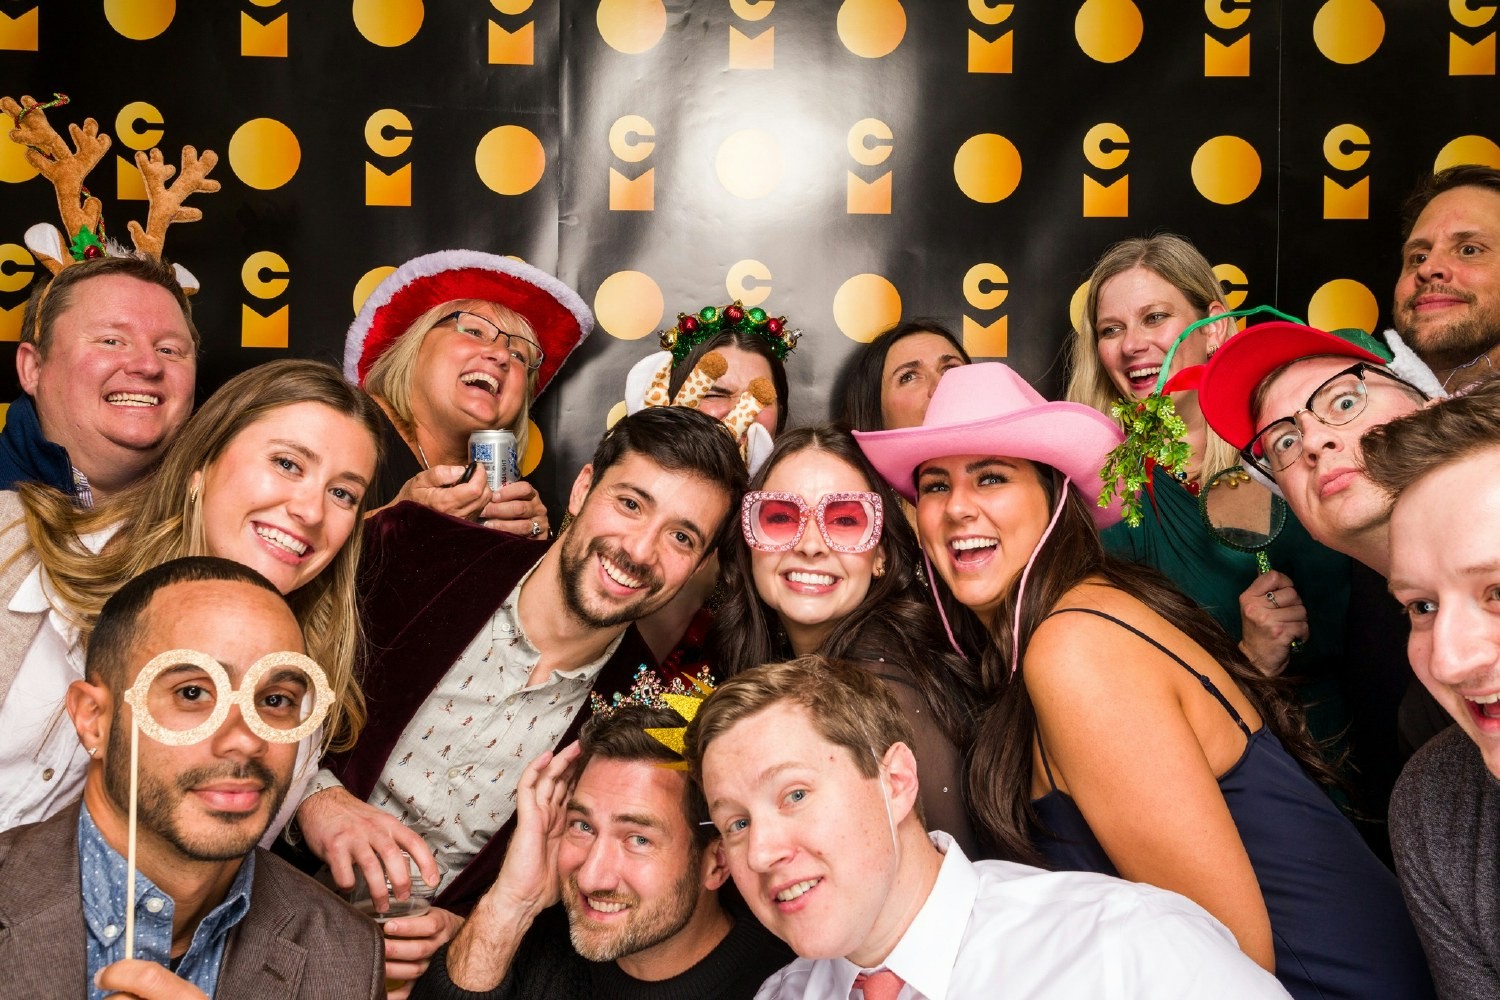 At the end of each year, we throw an epic year-end holiday party to celebrate our work, culture and each other. 